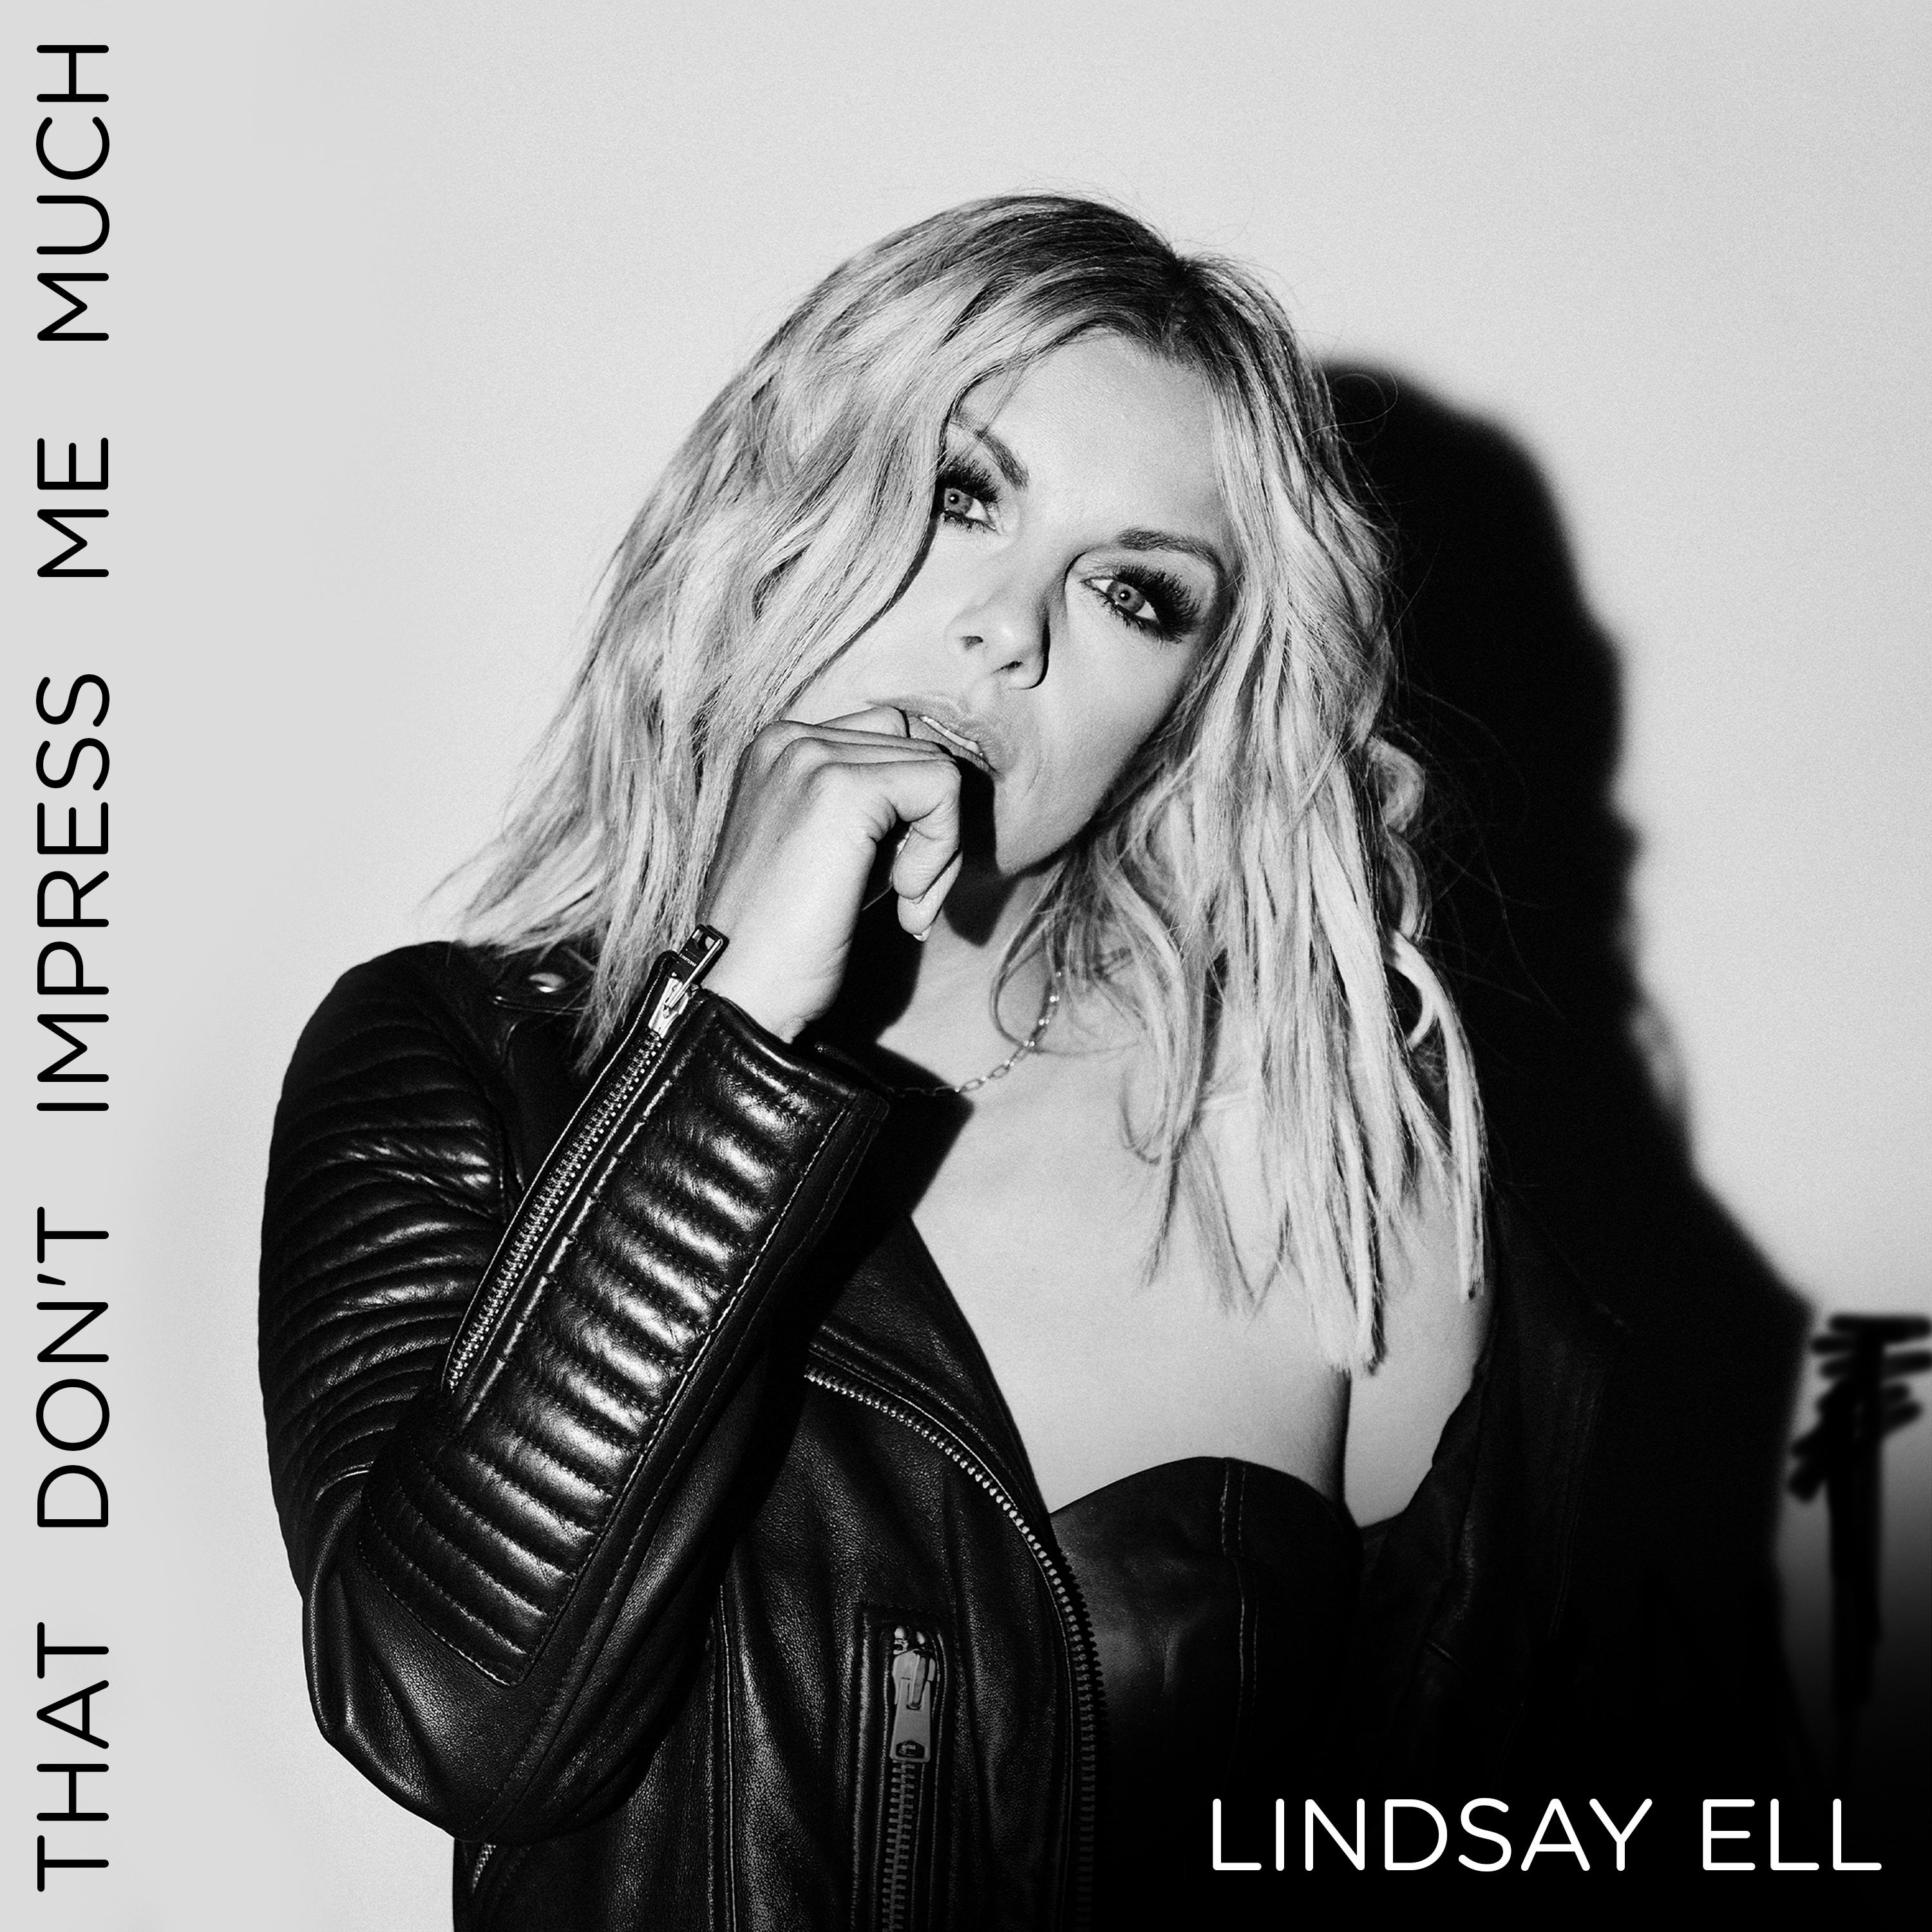 Lindsay Ell - That Don't Impress Me Much